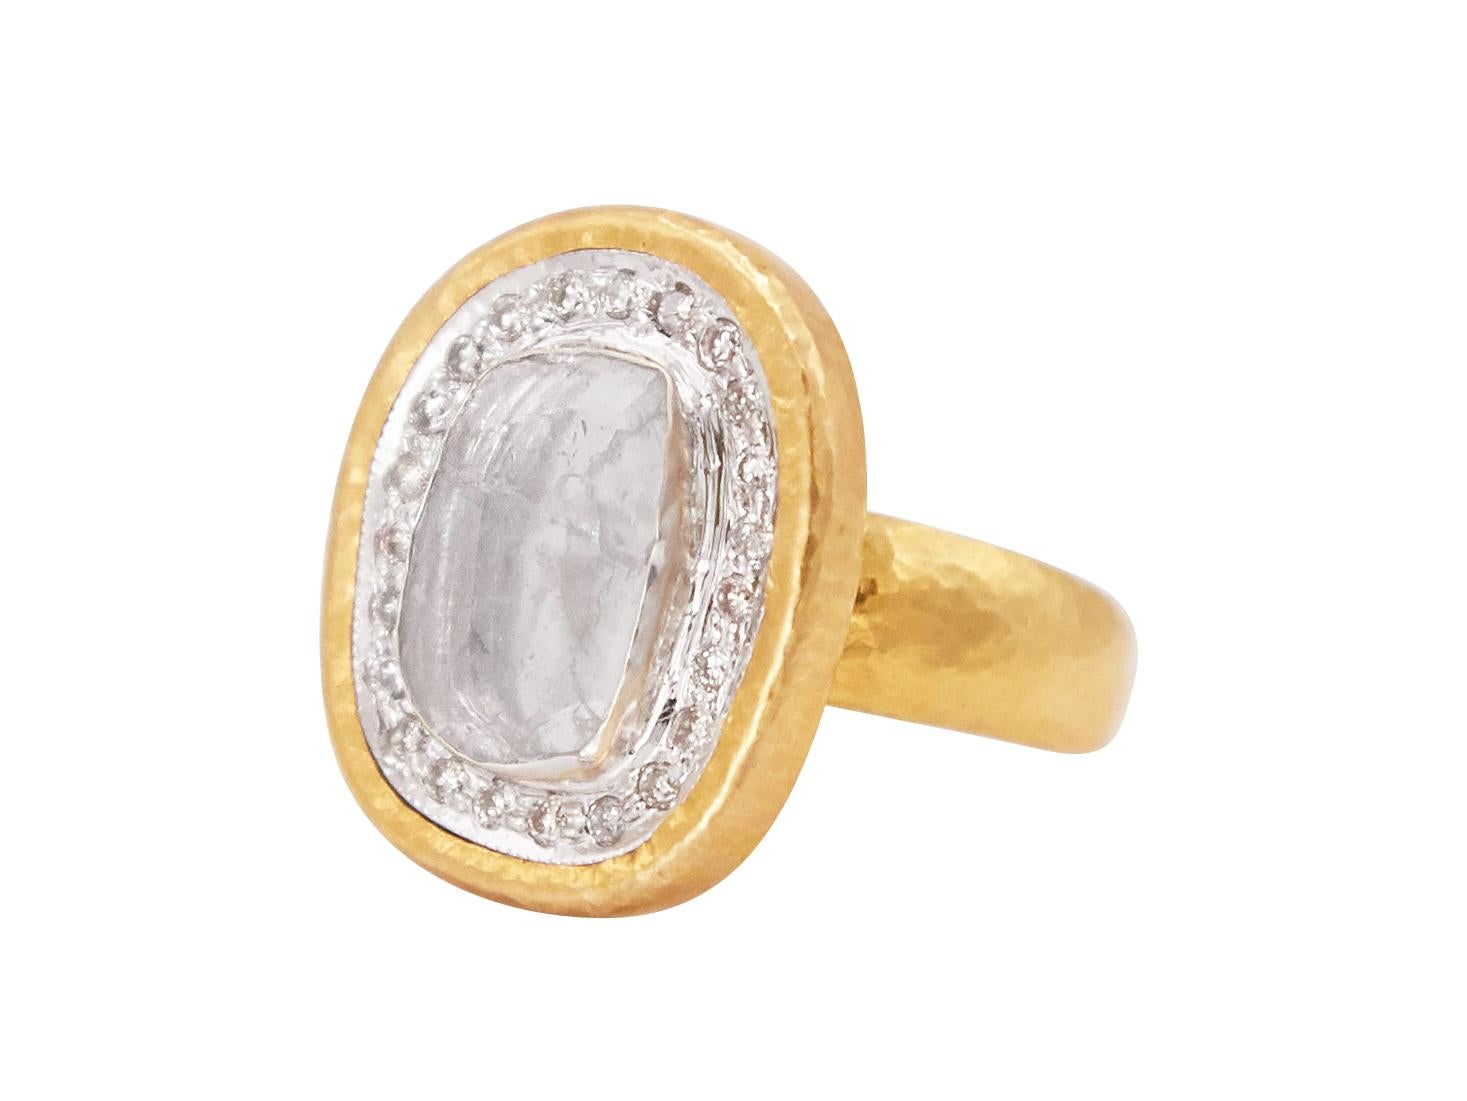 Rose Cut One-of-a-Kind Elements Gold Center Stone Ring, with Diamond For Sale